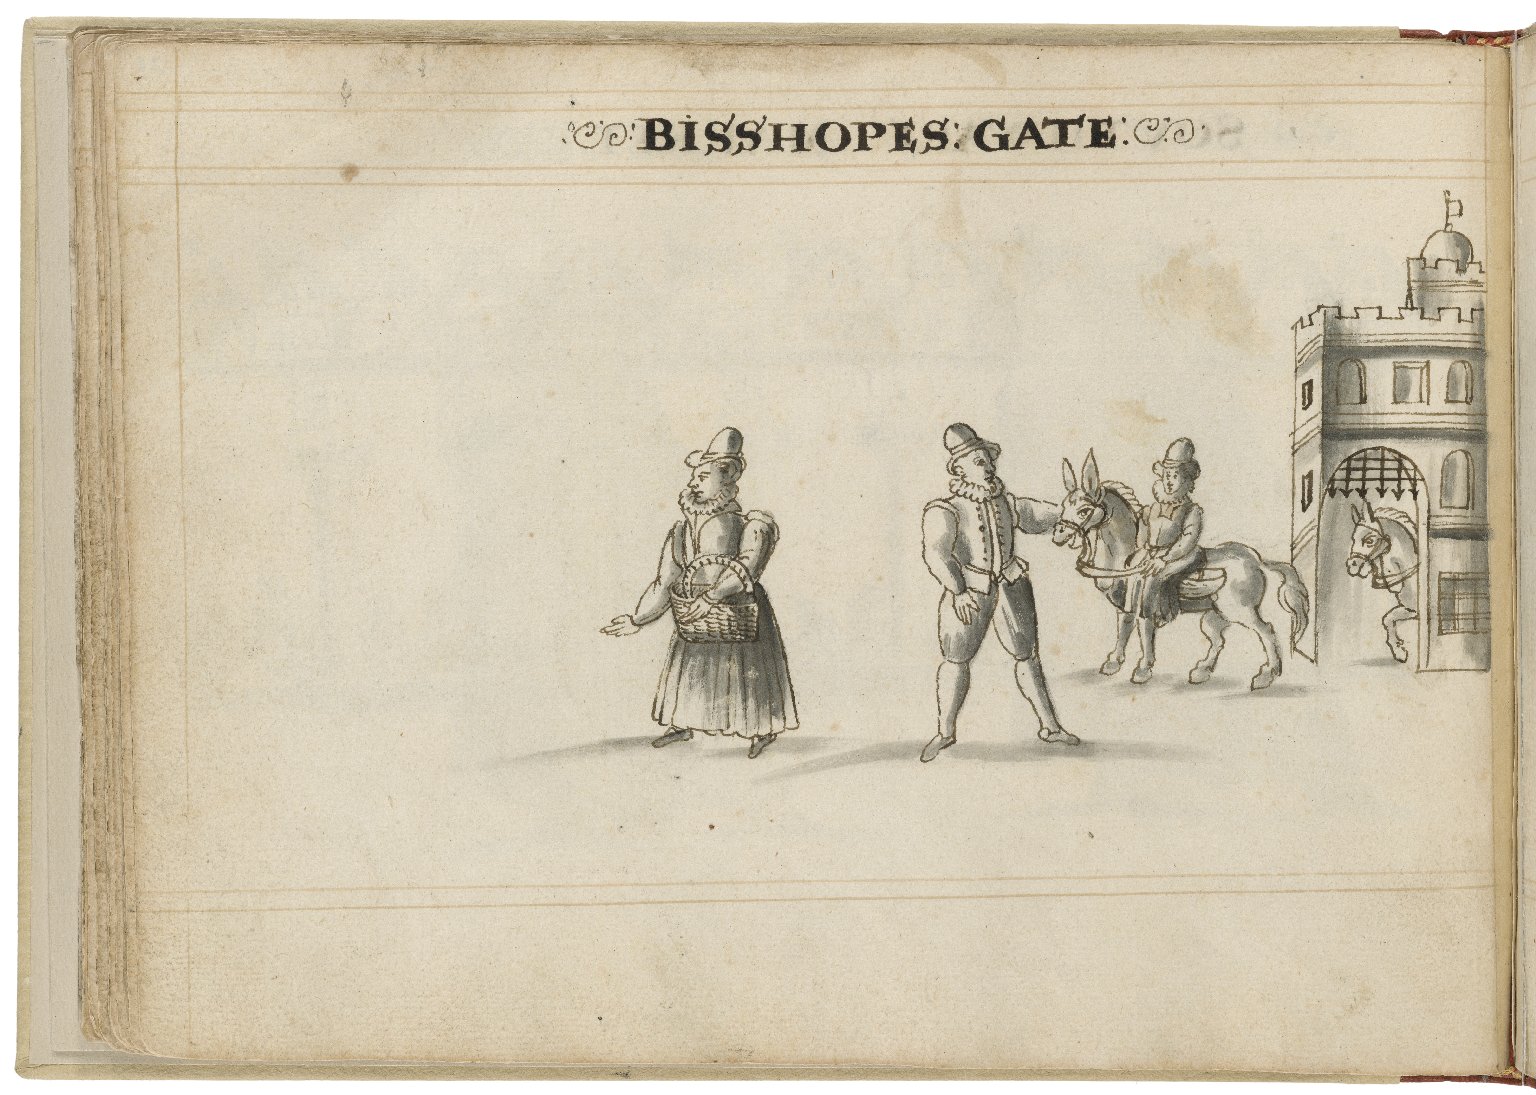 Drawing of Bishopsgate by Hugh Alley. Image courtesy of the Folger Digital Image Collection.